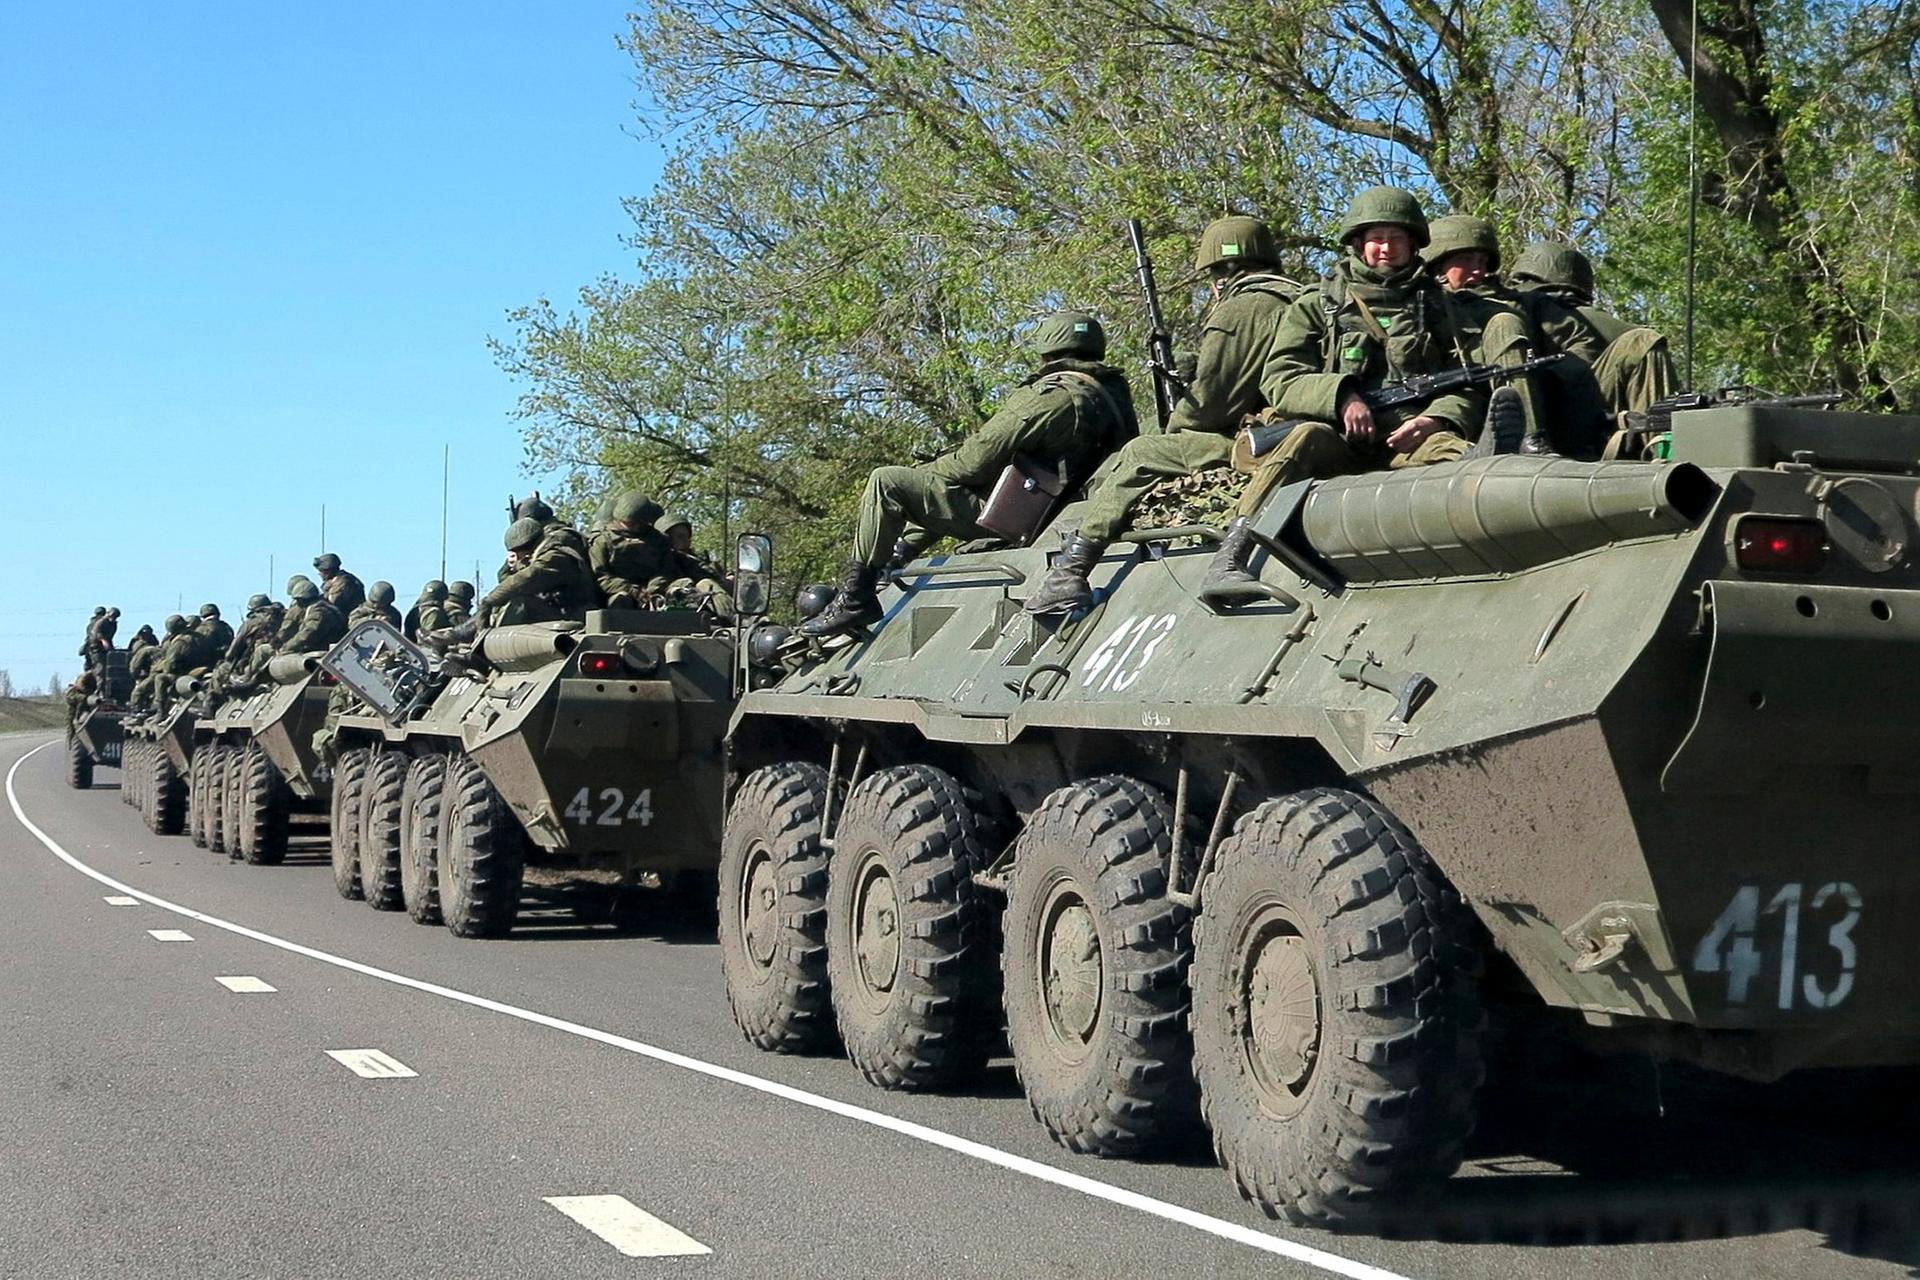 Russian troops on the move Friday, on the outskirts of the city of Belgorod, just a few miles from the border with Ukraine.